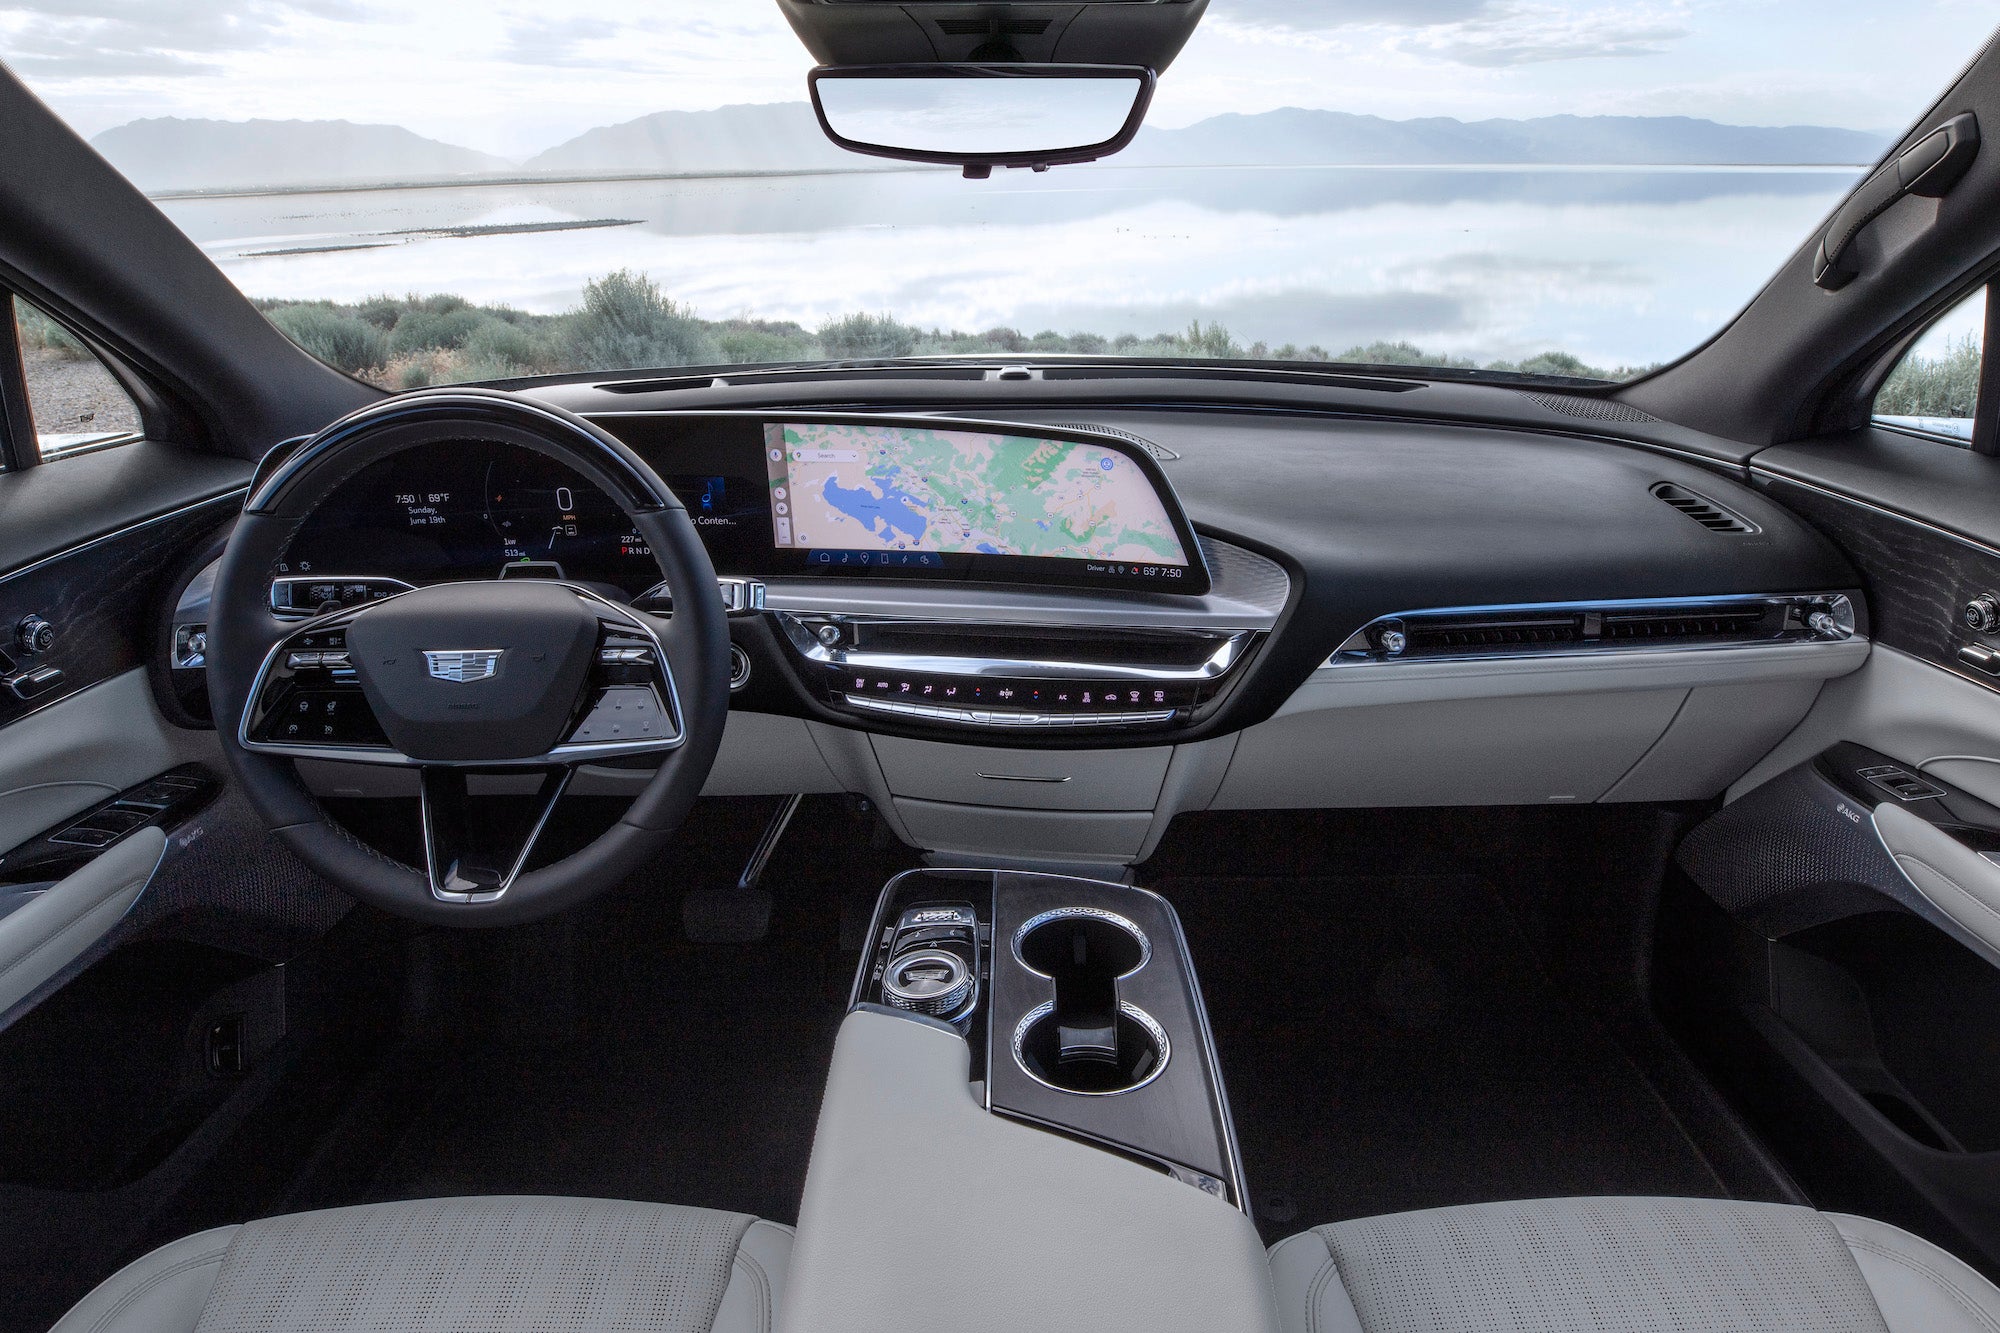 How computer-aided engineering shaped Cadillac’s first EV to a tee